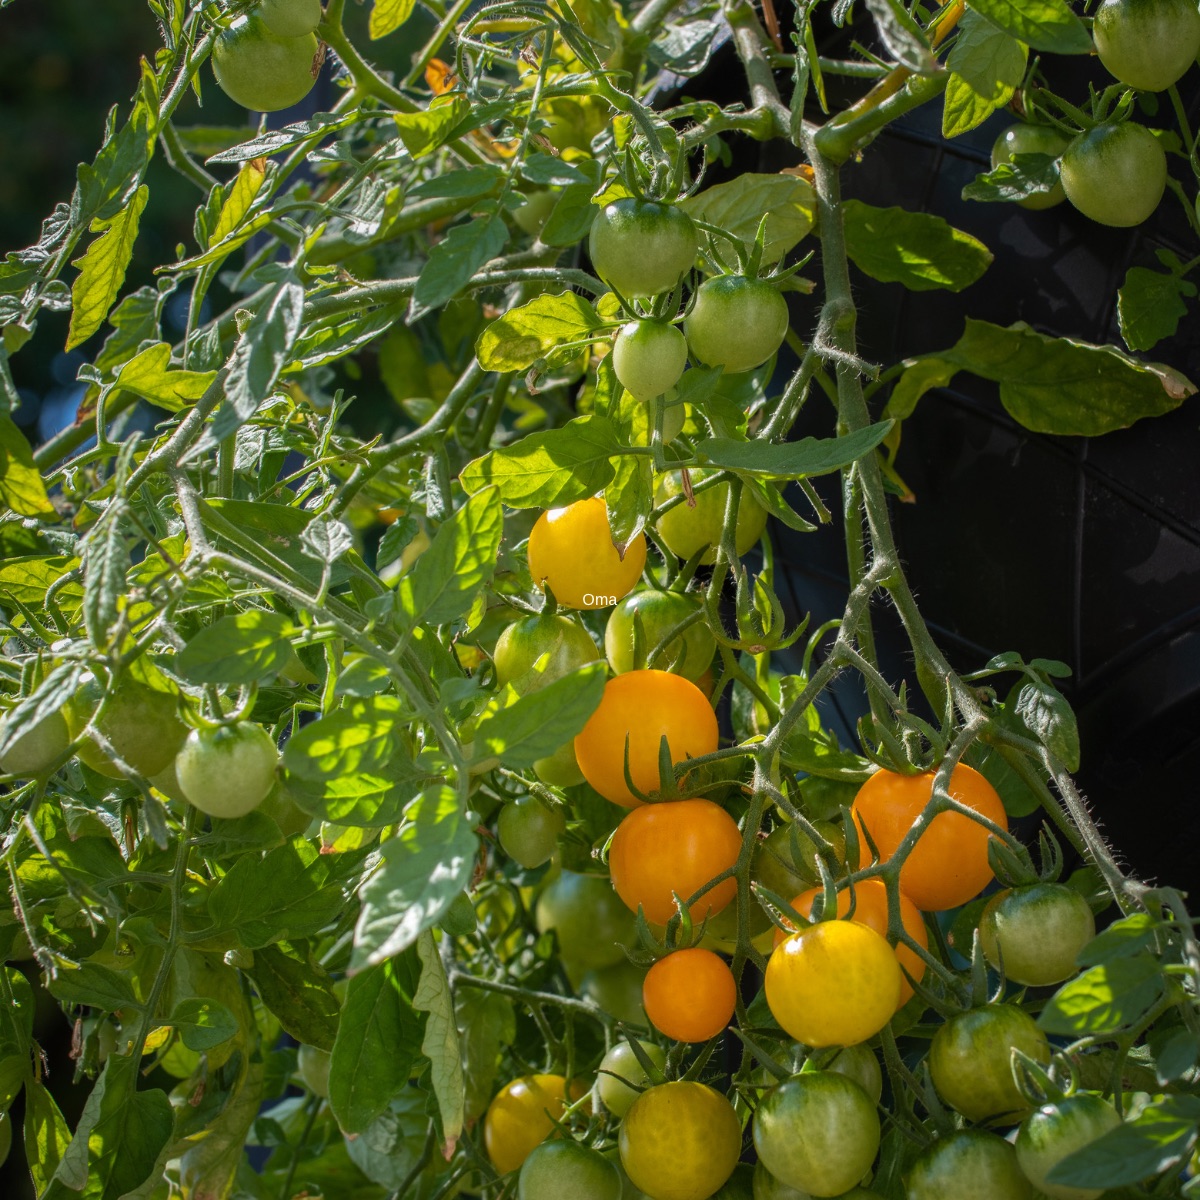 Yellow cherry tomatoes hanging in clusters.